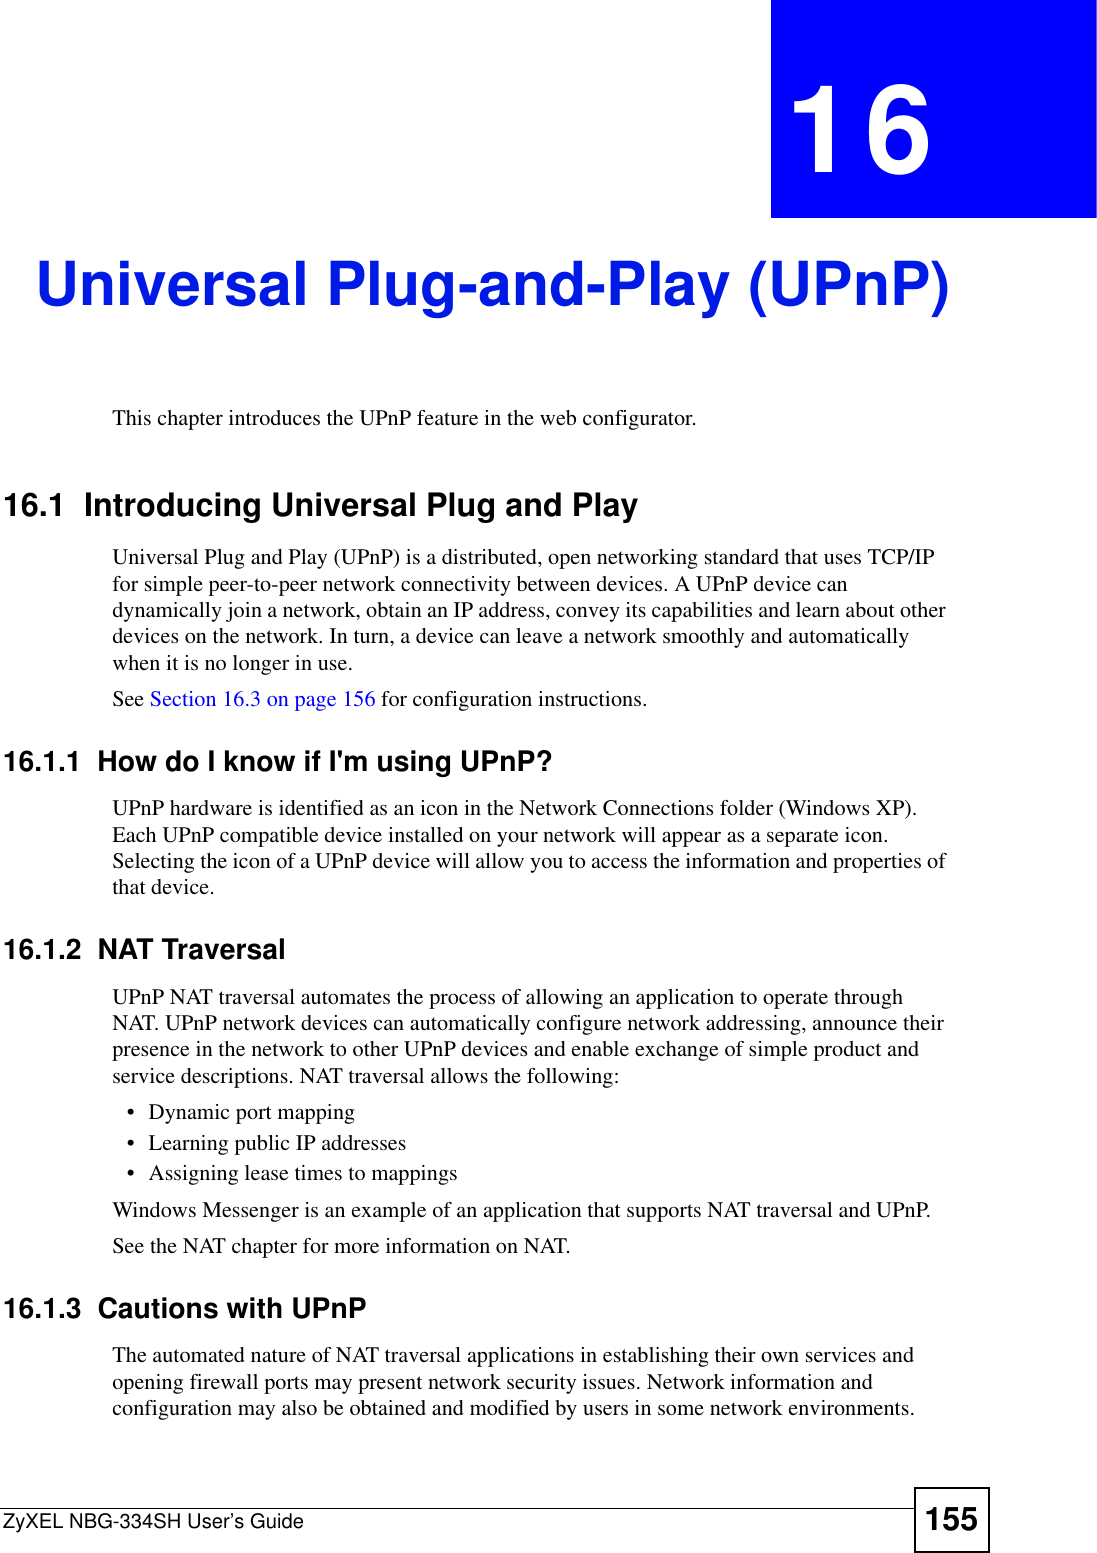 ZyXEL NBG-334SH User’s Guide 155CHAPTER 16Universal Plug-and-Play (UPnP)This chapter introduces the UPnP feature in the web configurator.16.1  Introducing Universal Plug and Play Universal Plug and Play (UPnP) is a distributed, open networking standard that uses TCP/IP for simple peer-to-peer network connectivity between devices. A UPnP device can dynamically join a network, obtain an IP address, convey its capabilities and learn about other devices on the network. In turn, a device can leave a network smoothly and automatically when it is no longer in use.See Section 16.3 on page 156 for configuration instructions. 16.1.1  How do I know if I&apos;m using UPnP? UPnP hardware is identified as an icon in the Network Connections folder (Windows XP). Each UPnP compatible device installed on your network will appear as a separate icon. Selecting the icon of a UPnP device will allow you to access the information and properties of that device. 16.1.2  NAT TraversalUPnP NAT traversal automates the process of allowing an application to operate through NAT. UPnP network devices can automatically configure network addressing, announce their presence in the network to other UPnP devices and enable exchange of simple product and service descriptions. NAT traversal allows the following:• Dynamic port mapping• Learning public IP addresses• Assigning lease times to mappingsWindows Messenger is an example of an application that supports NAT traversal and UPnP. See the NAT chapter for more information on NAT.16.1.3  Cautions with UPnPThe automated nature of NAT traversal applications in establishing their own services and opening firewall ports may present network security issues. Network information and configuration may also be obtained and modified by users in some network environments. 